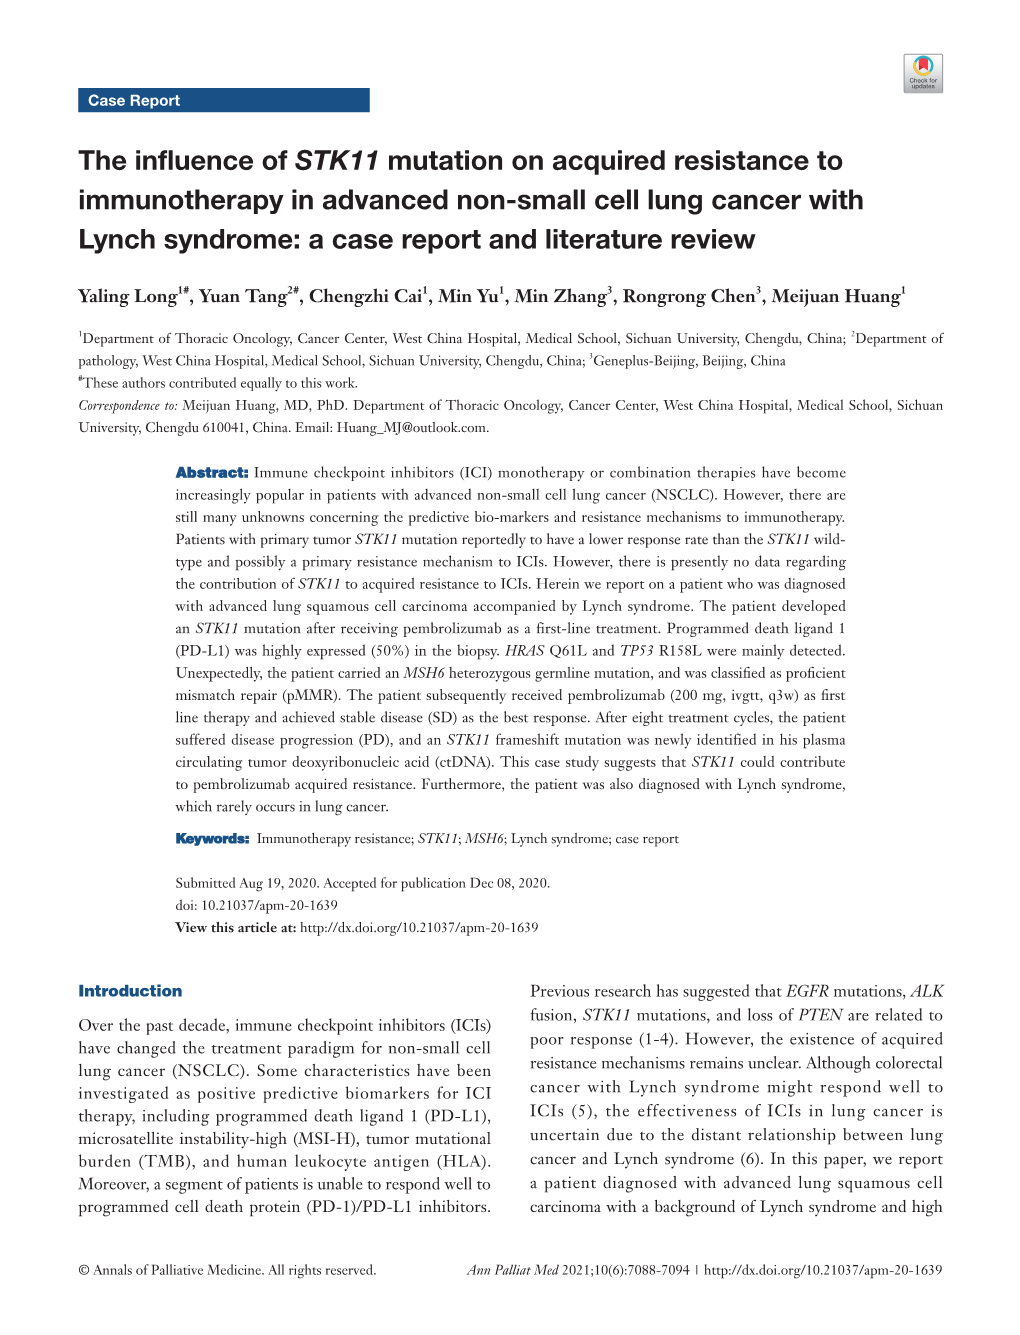 The Influence of STK11 Mutation on Acquired Resistance to Immunotherapy in Advanced Non-Small Cell Lung Cancer with Lynch Syndro